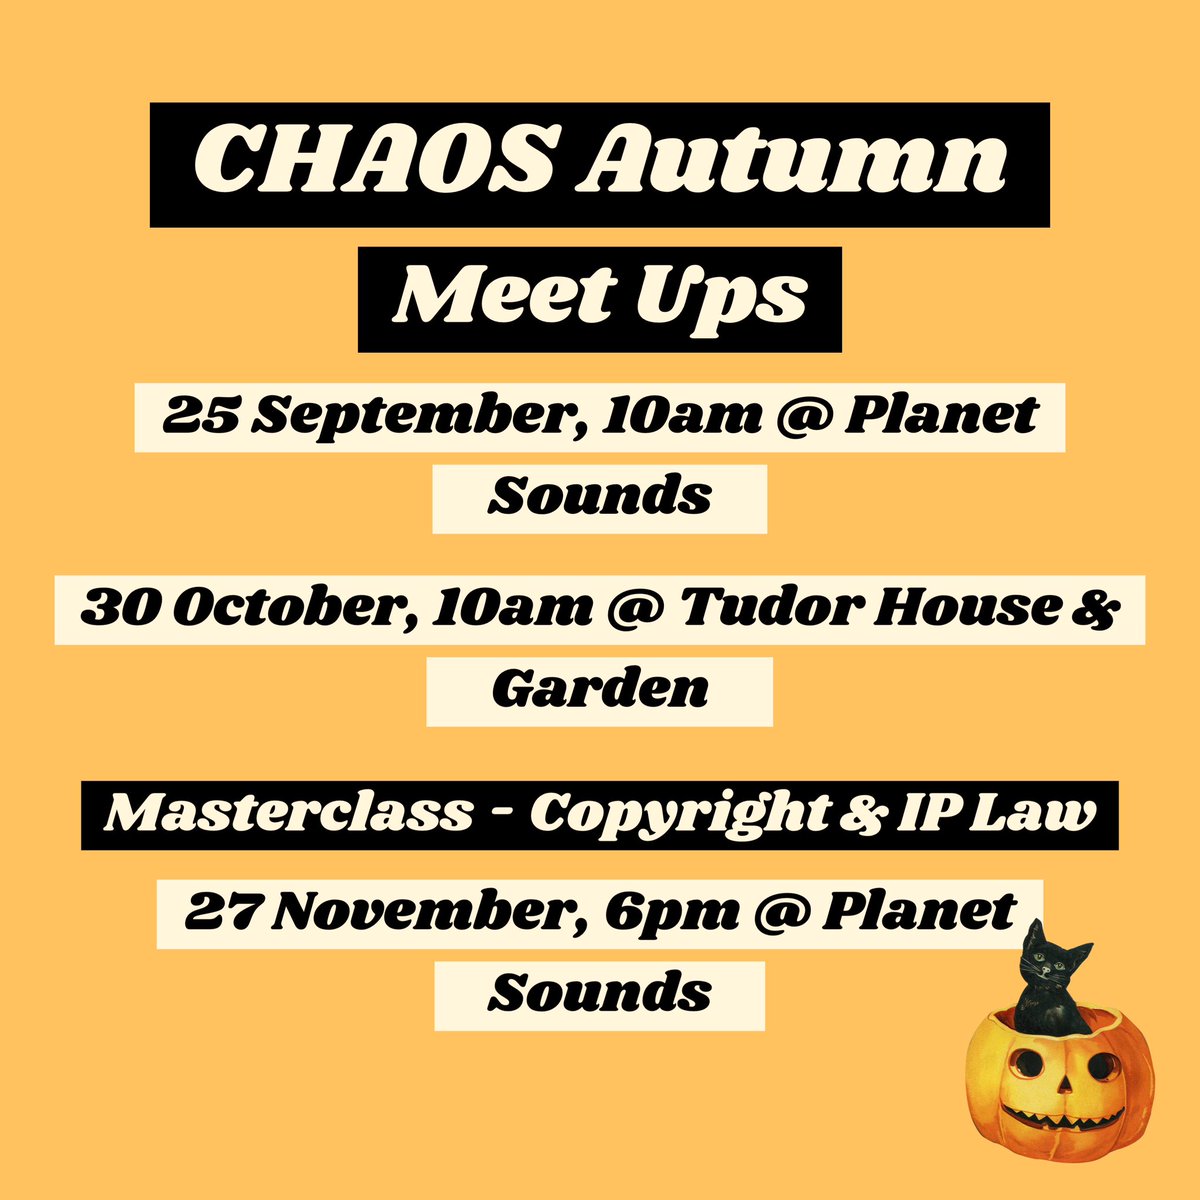 🥐 Our next meet on Monday 25 Sept @ Planet Sounds ⭐️ We’re also holding our first CHAOS Masterclass in November! ⚡️Book your free place for our meet ups and masterclass here 👇 chaosnetwork.org.uk/meetings/